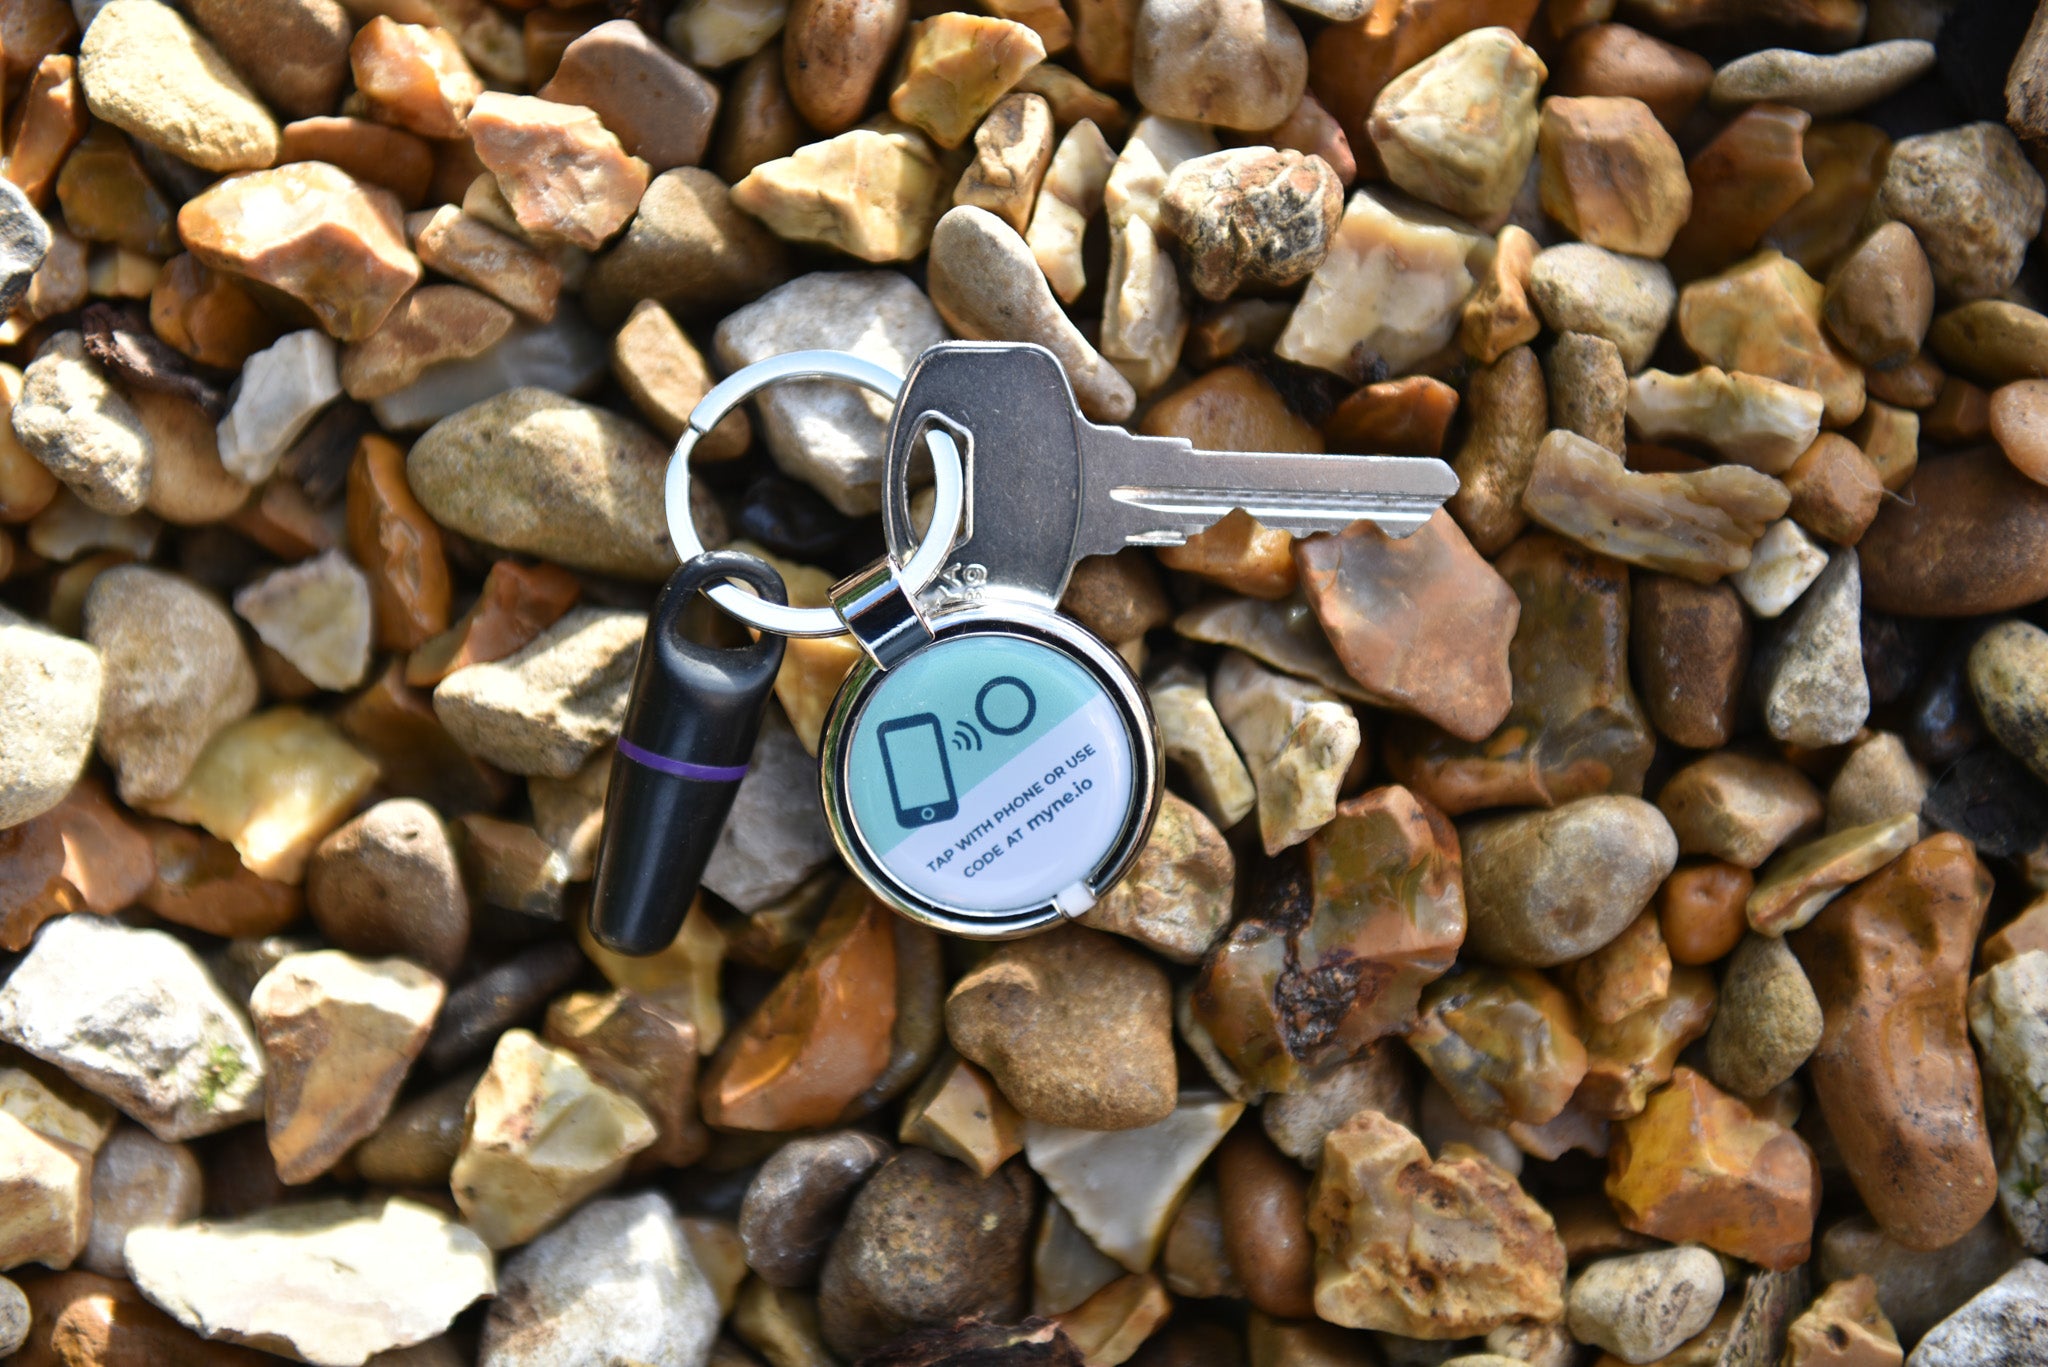 Digital keyring attached to key and fob has been dropped on pebbles